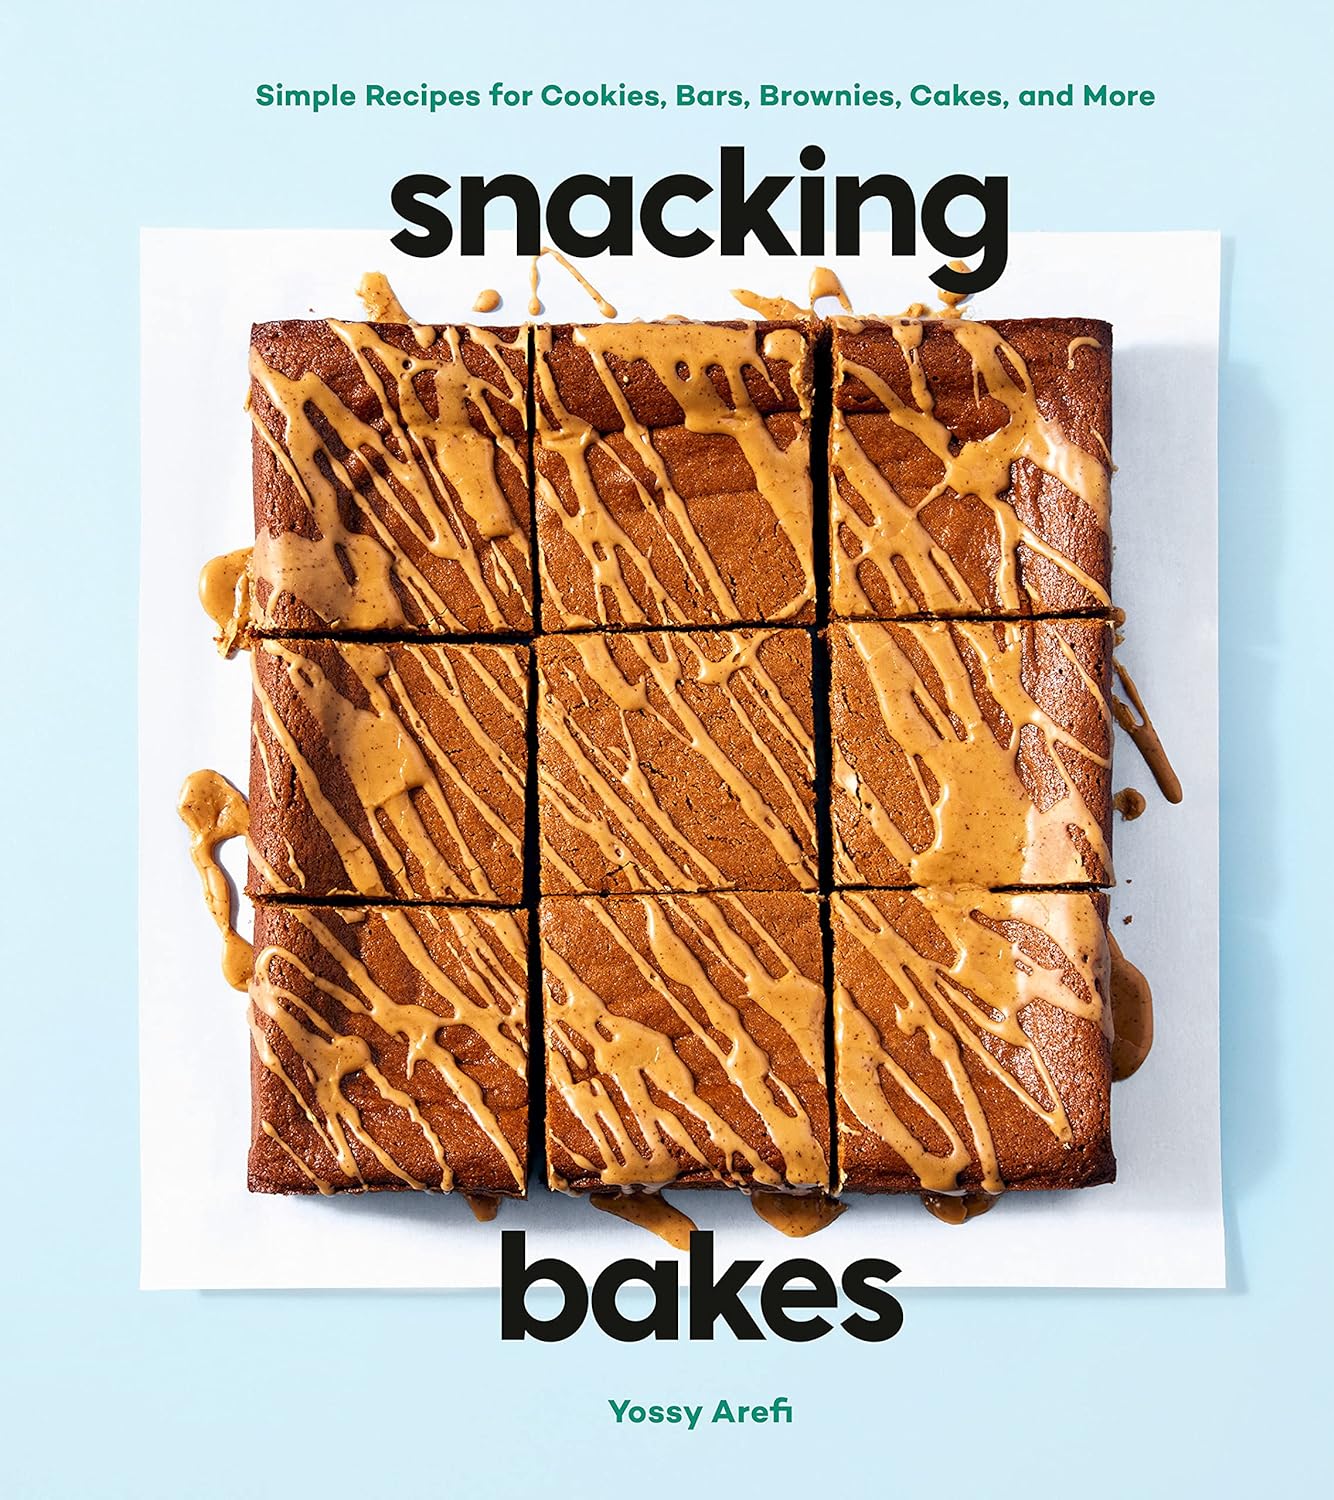 Snacking Bakes: Simple Recipes for Cookies, Bars, Brownies, Cakes, and More (Yossy Arefi)